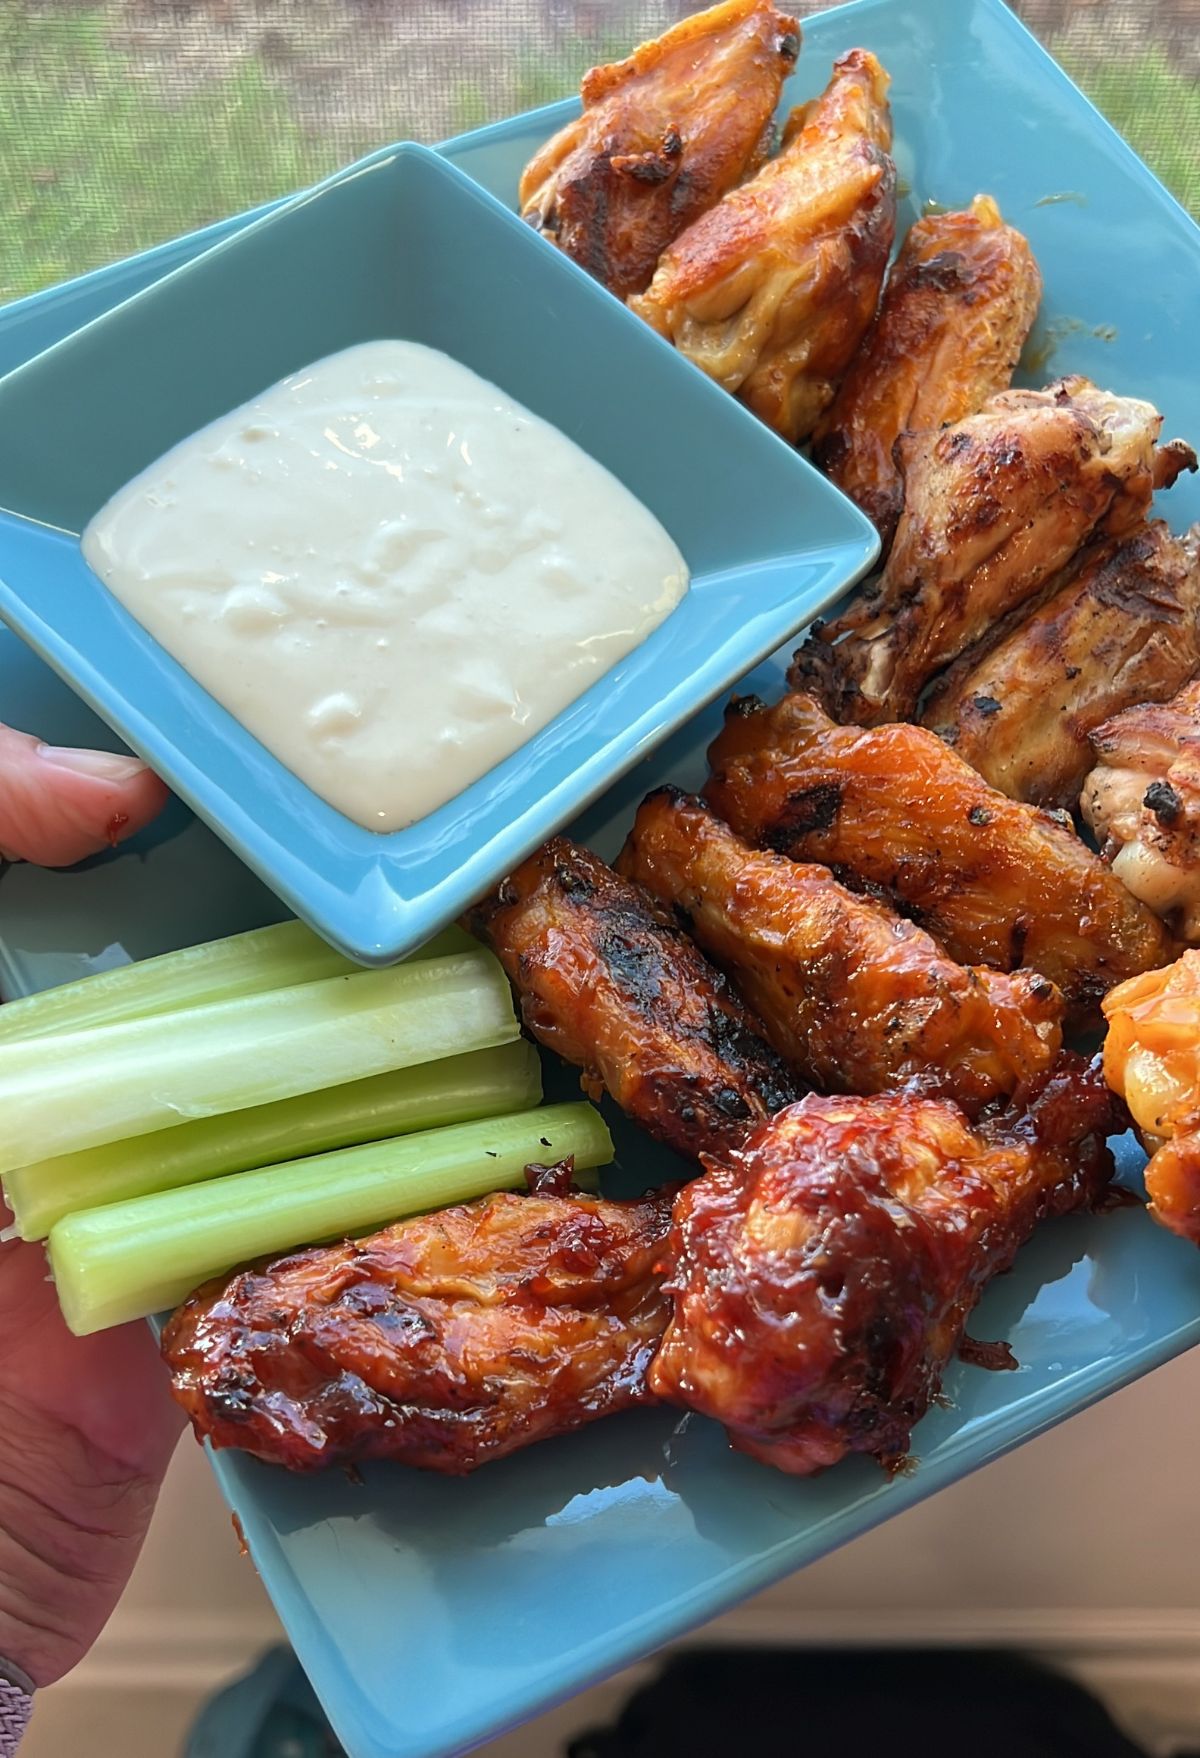 A plate of chicken wings and celery sticks.